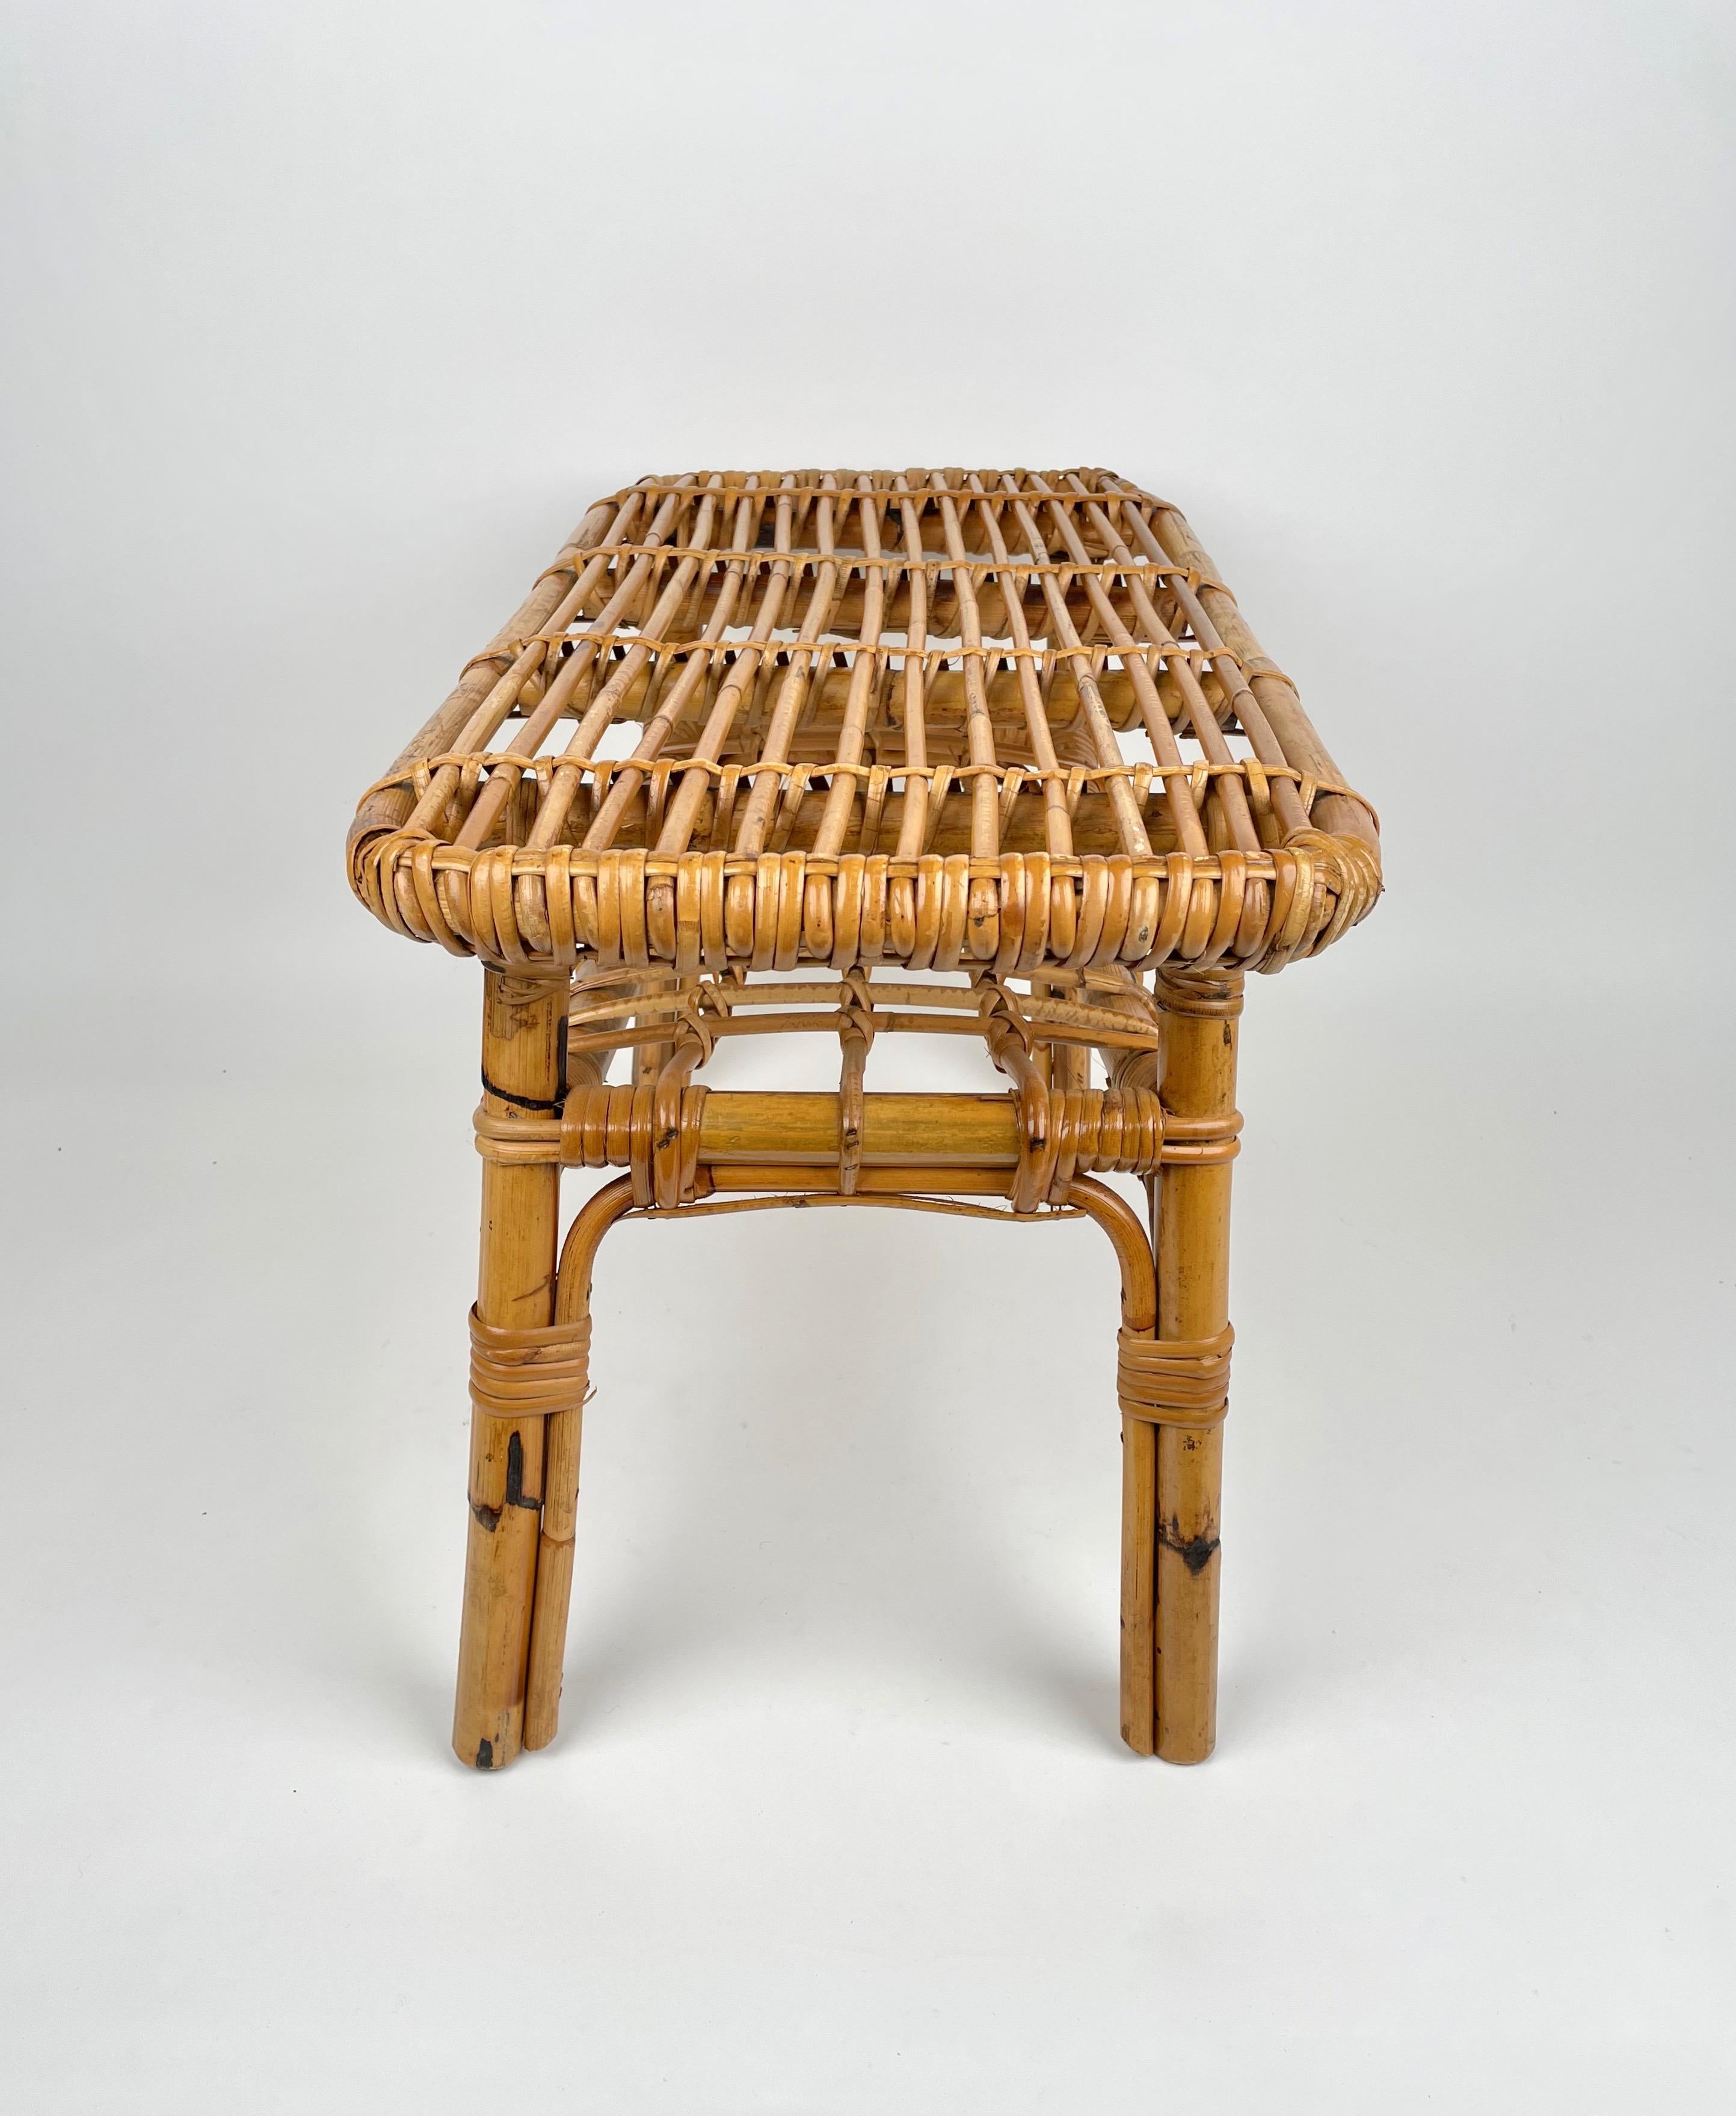 Bamboo & Rattan French Riviera Coffee Table with Magazine Rack, Italy, 1960s For Sale 4